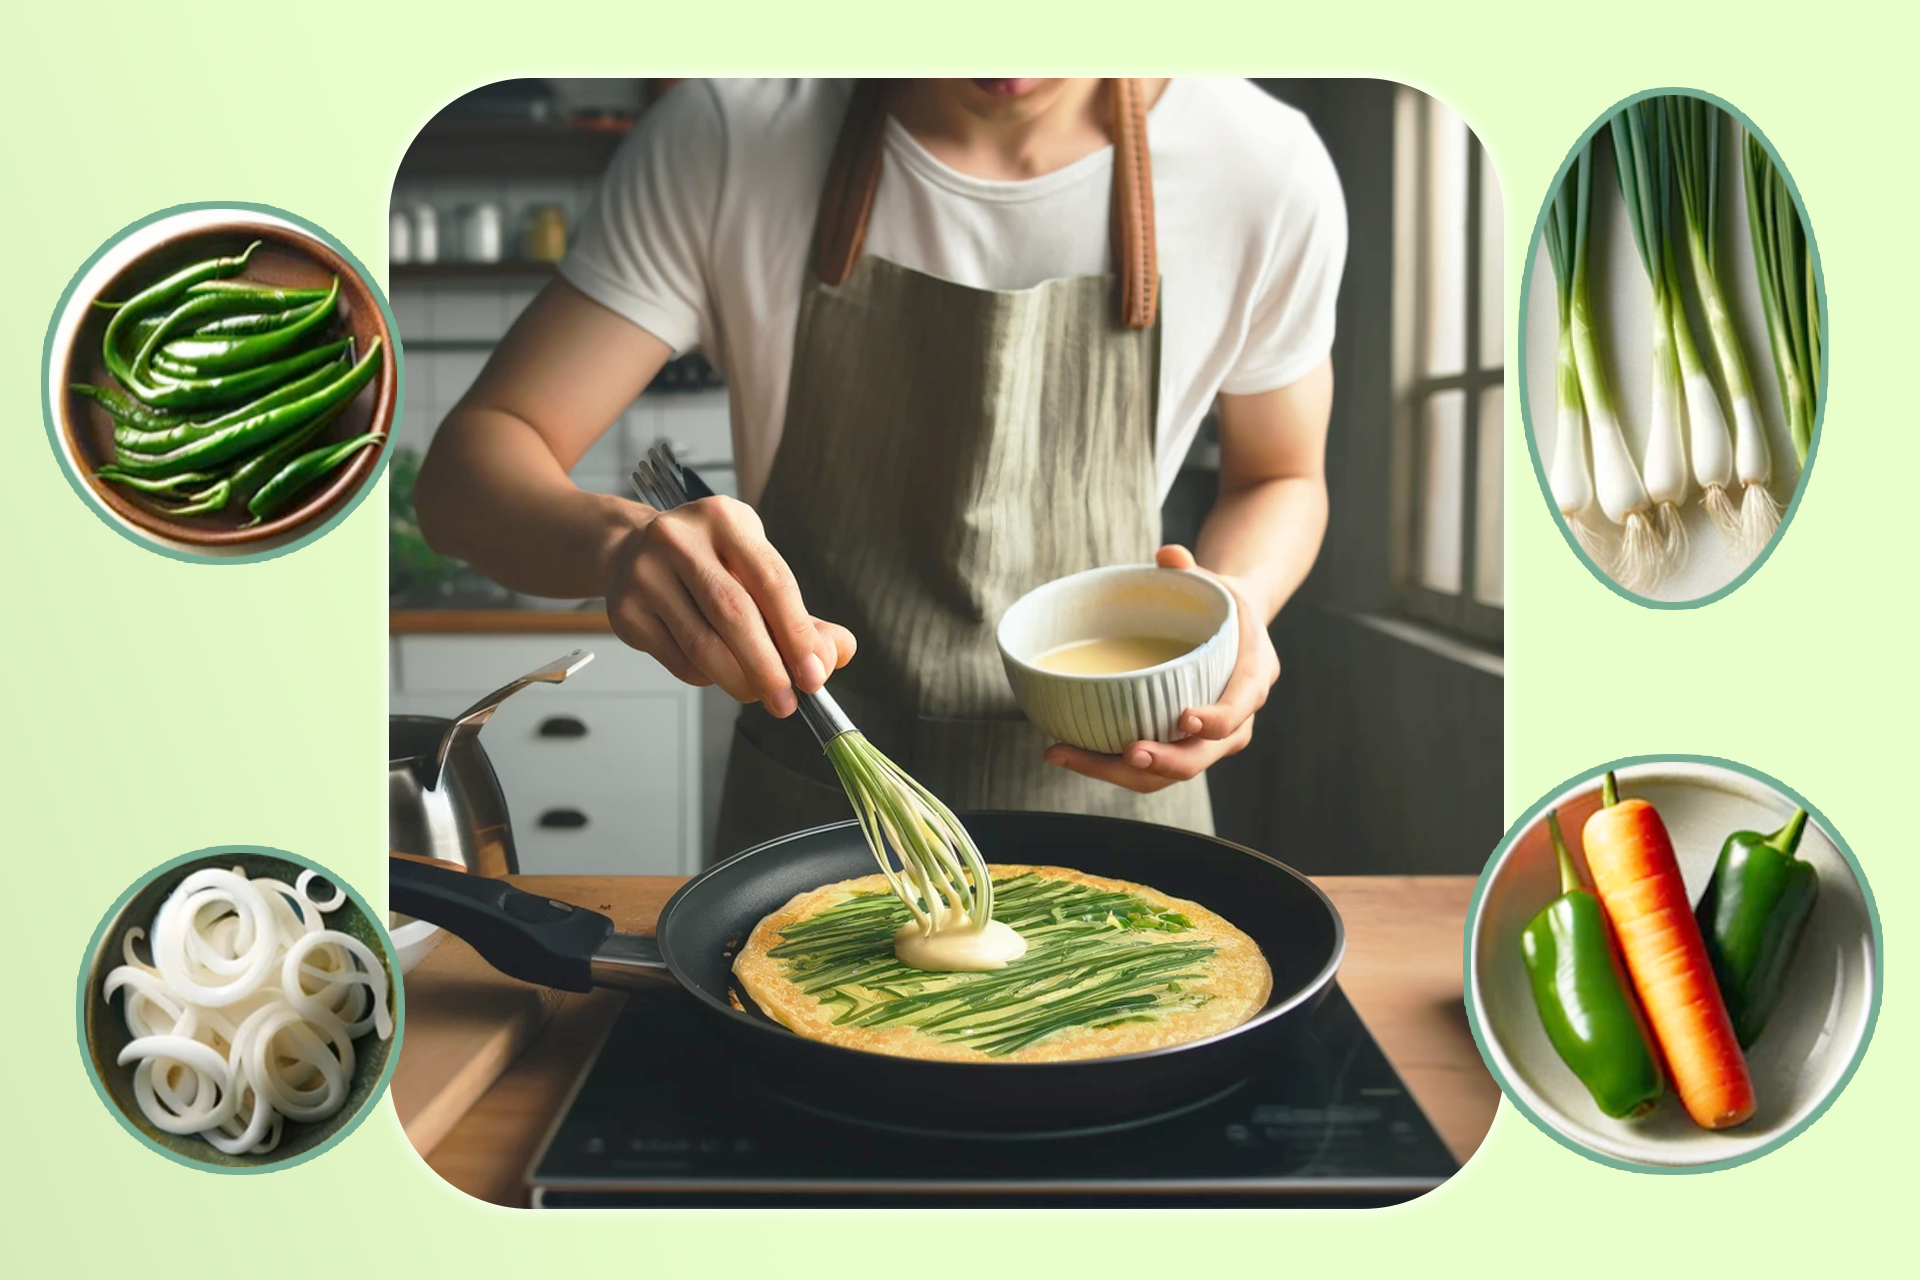 Let's Make 'Jeon' on a Rainy Day!" - A Korean Tradition Worth Sharing